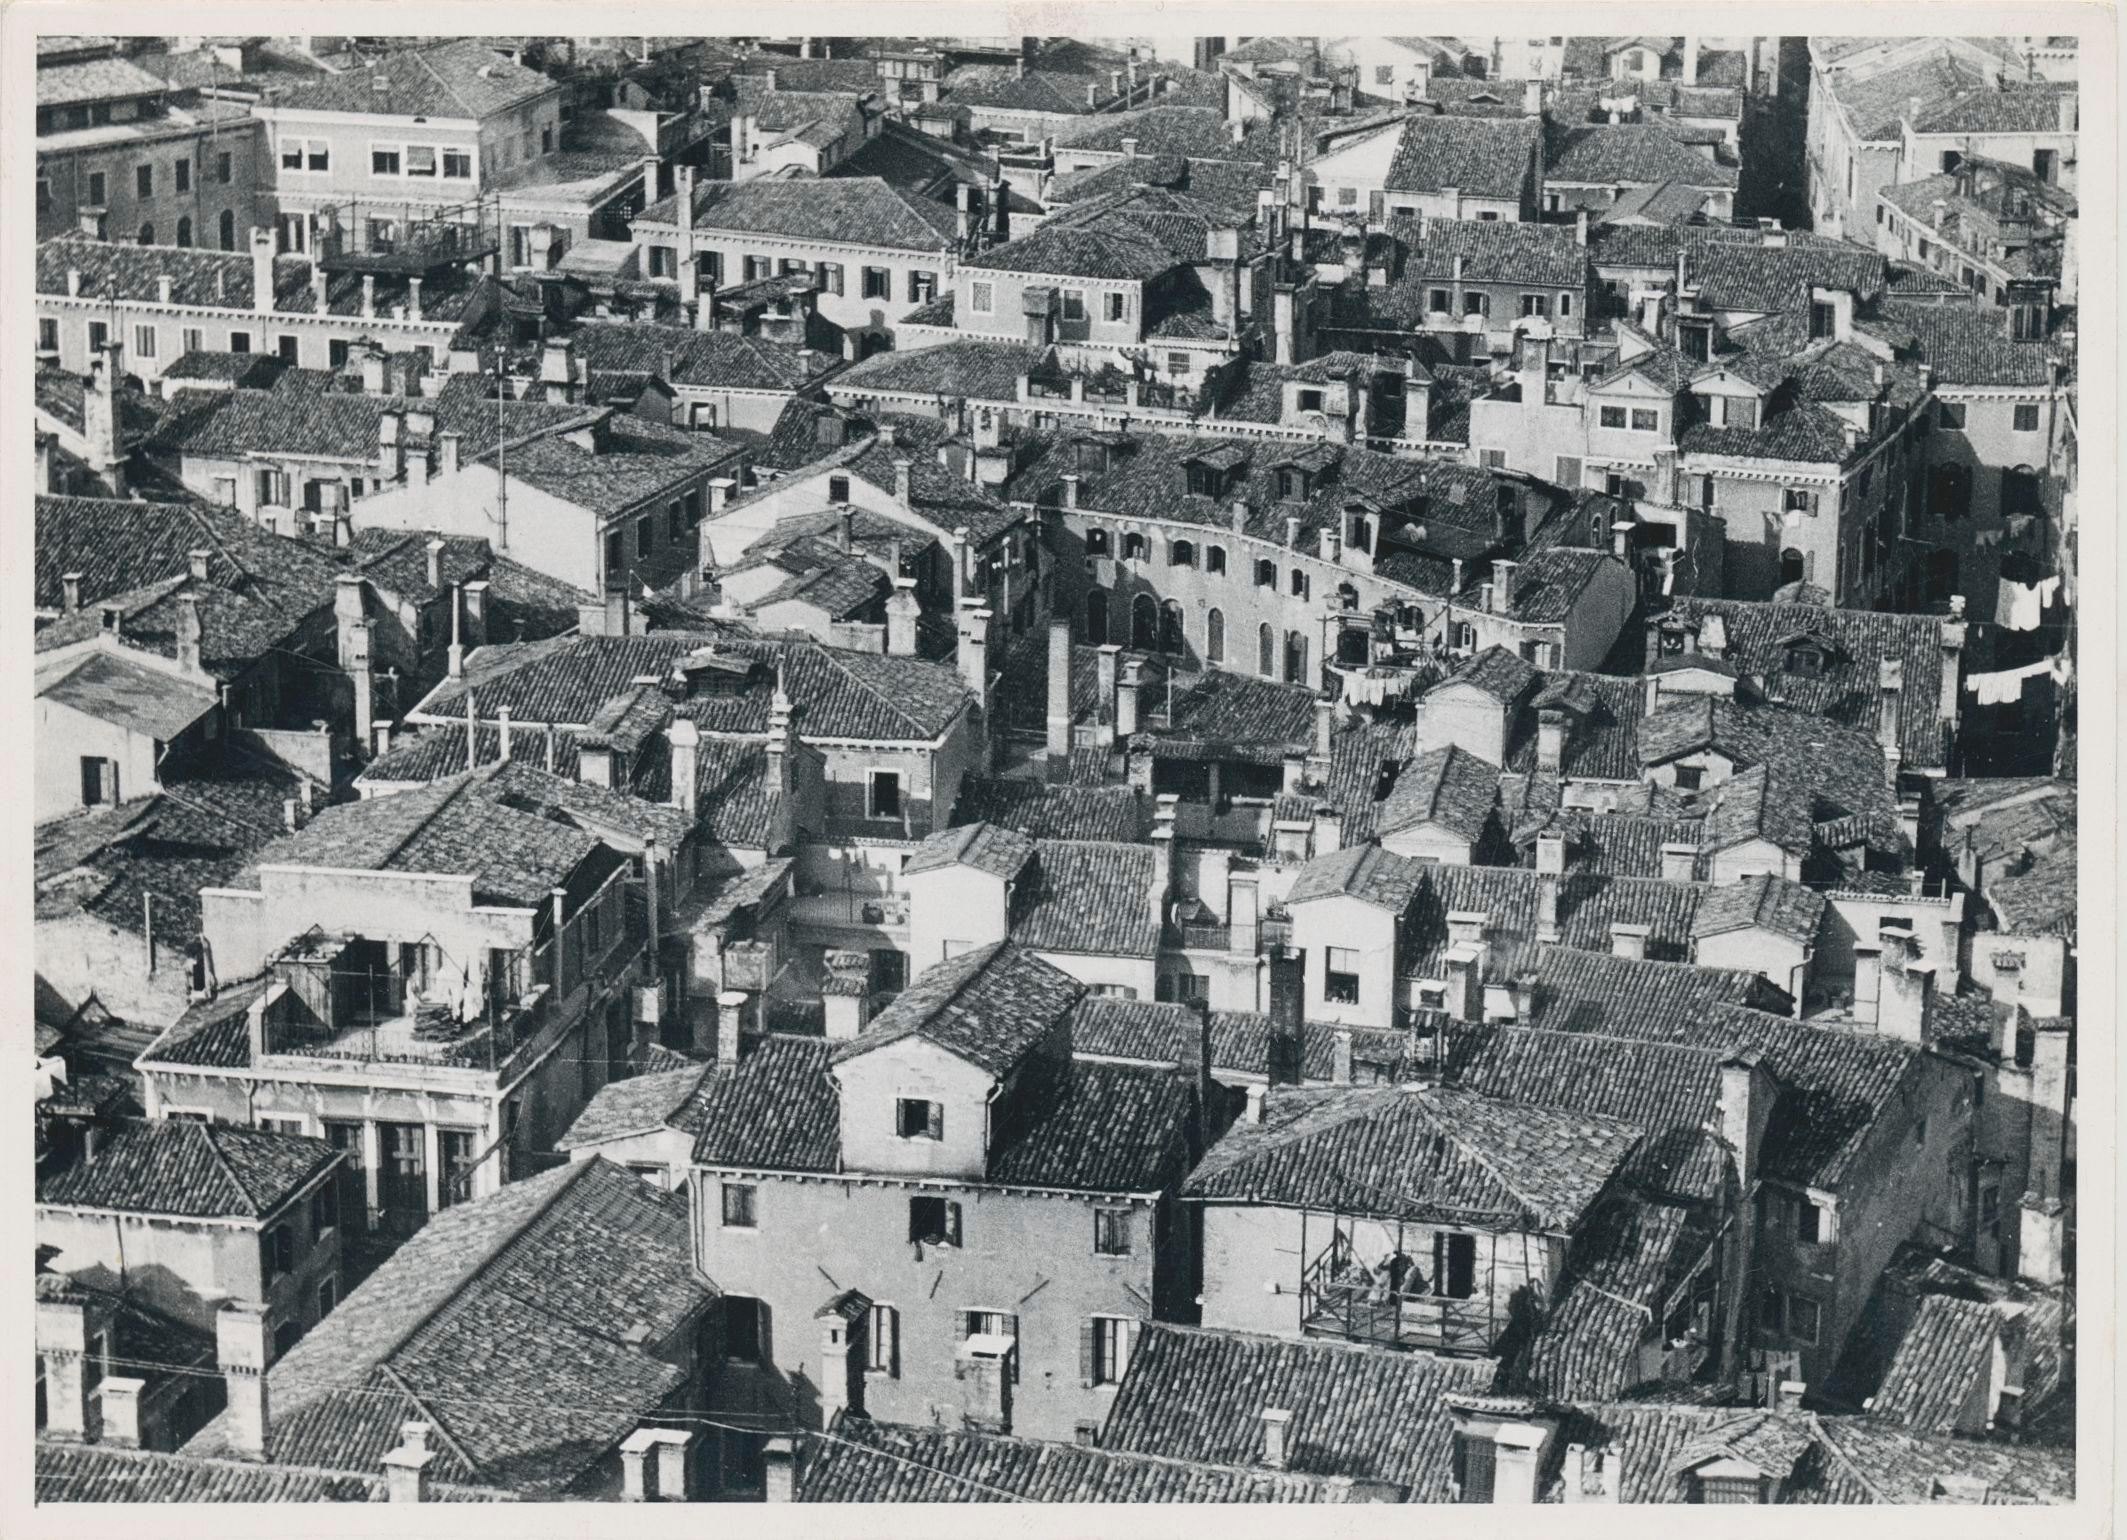 Erich Andres Black and White Photograph - Houses from above, Black and White, Italy 1950s, 13 x 17, 9 cm